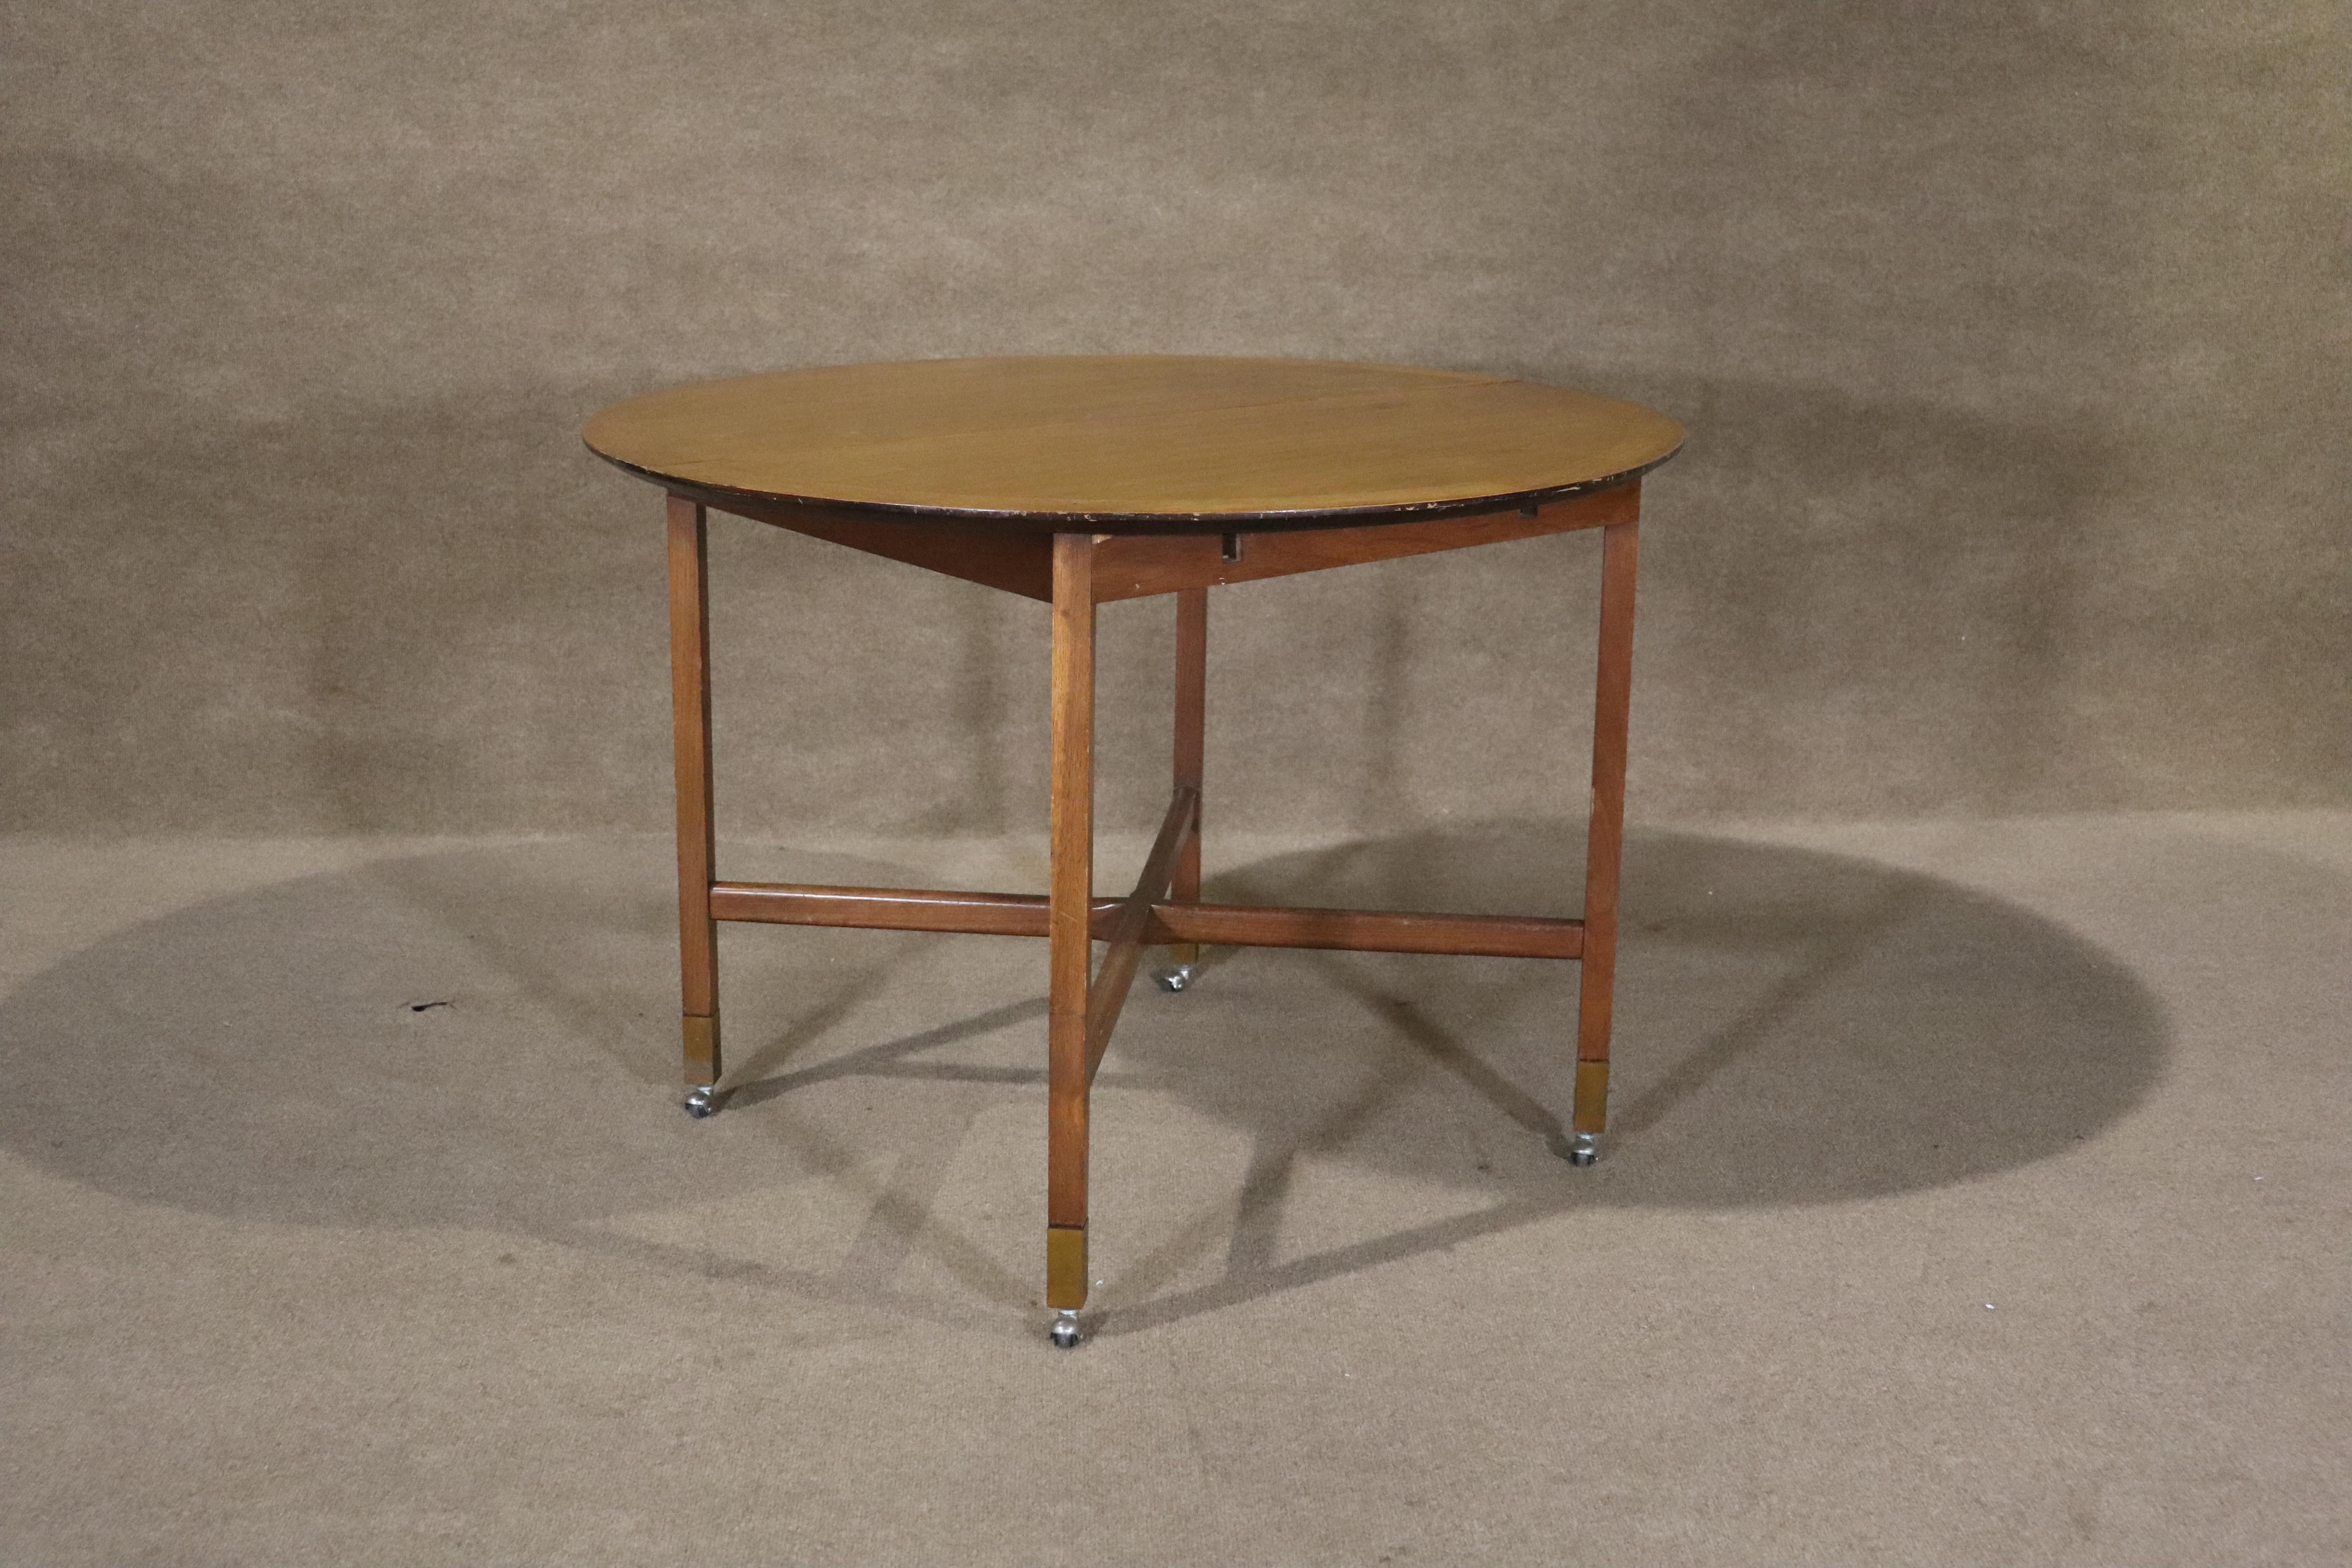 Round dinette table by Founders on caster wheels. Simple round design with cross stretchers and brass caps. Opens to accommodate leaves.